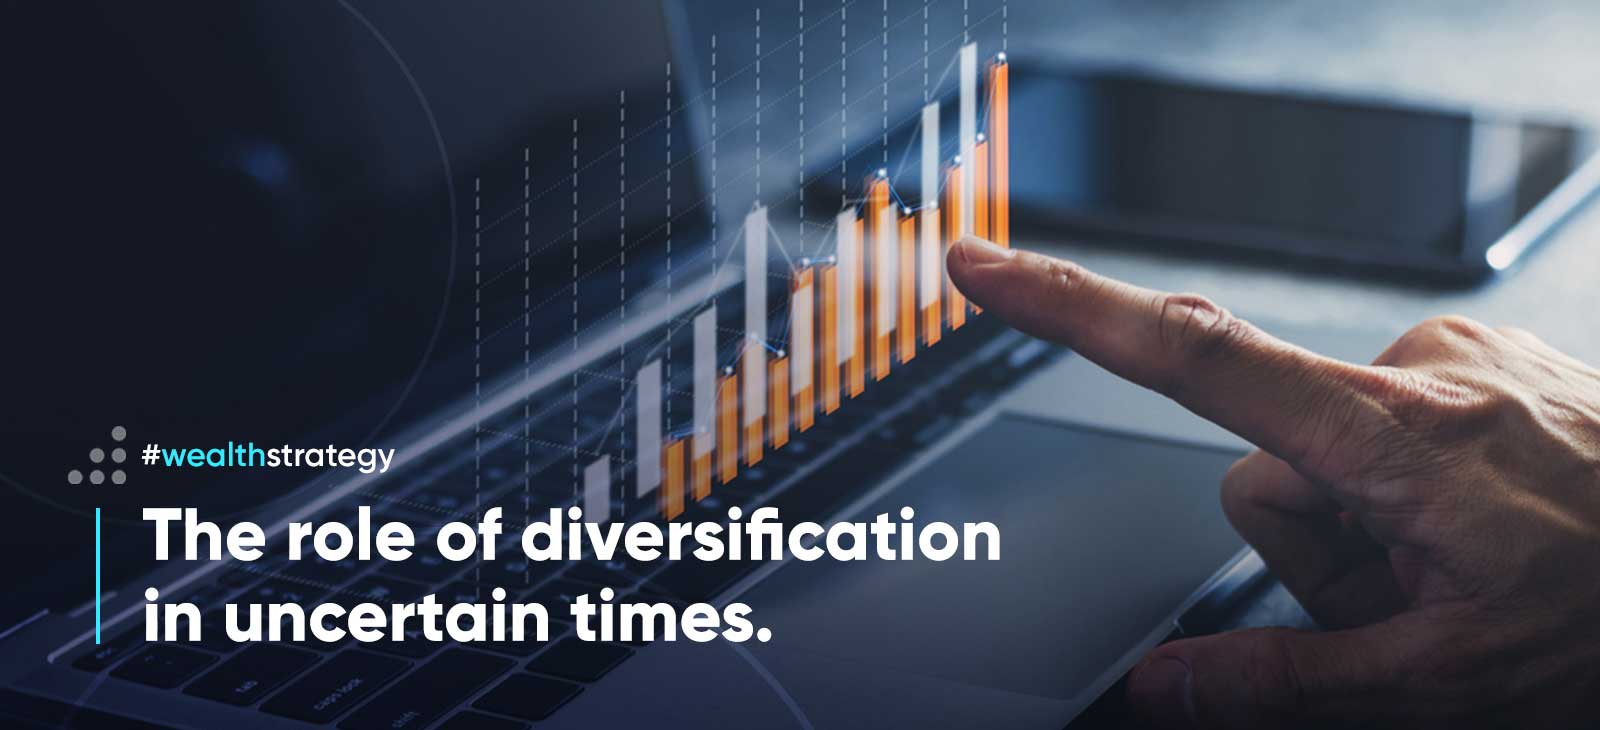 The role of diversification in uncertain times